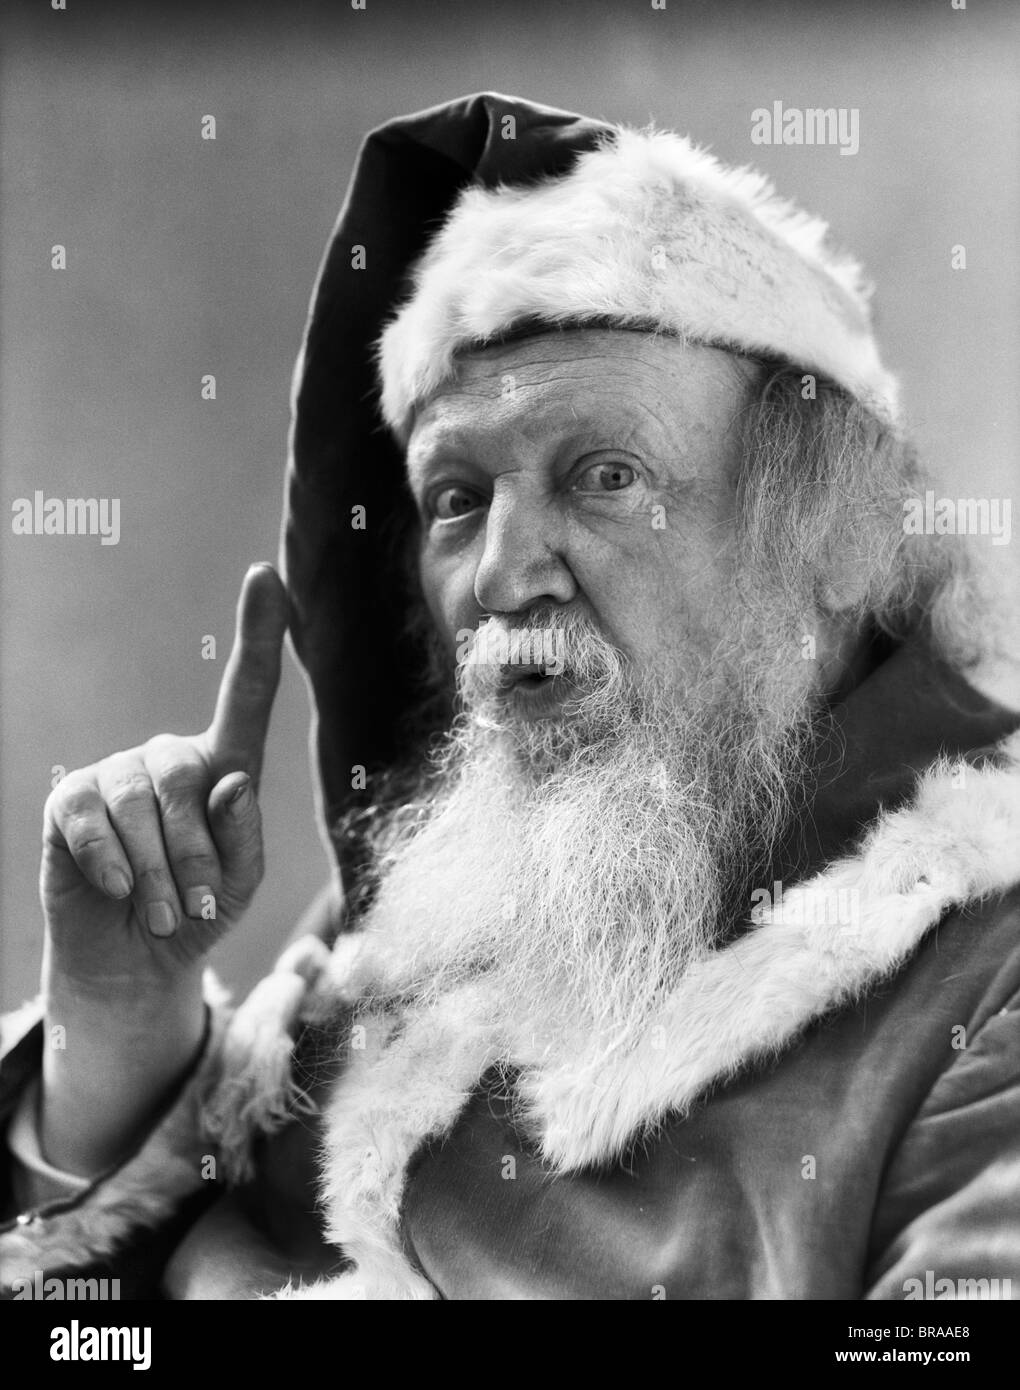 Santa claus gesture pointing finger Black and White Stock Photos ...